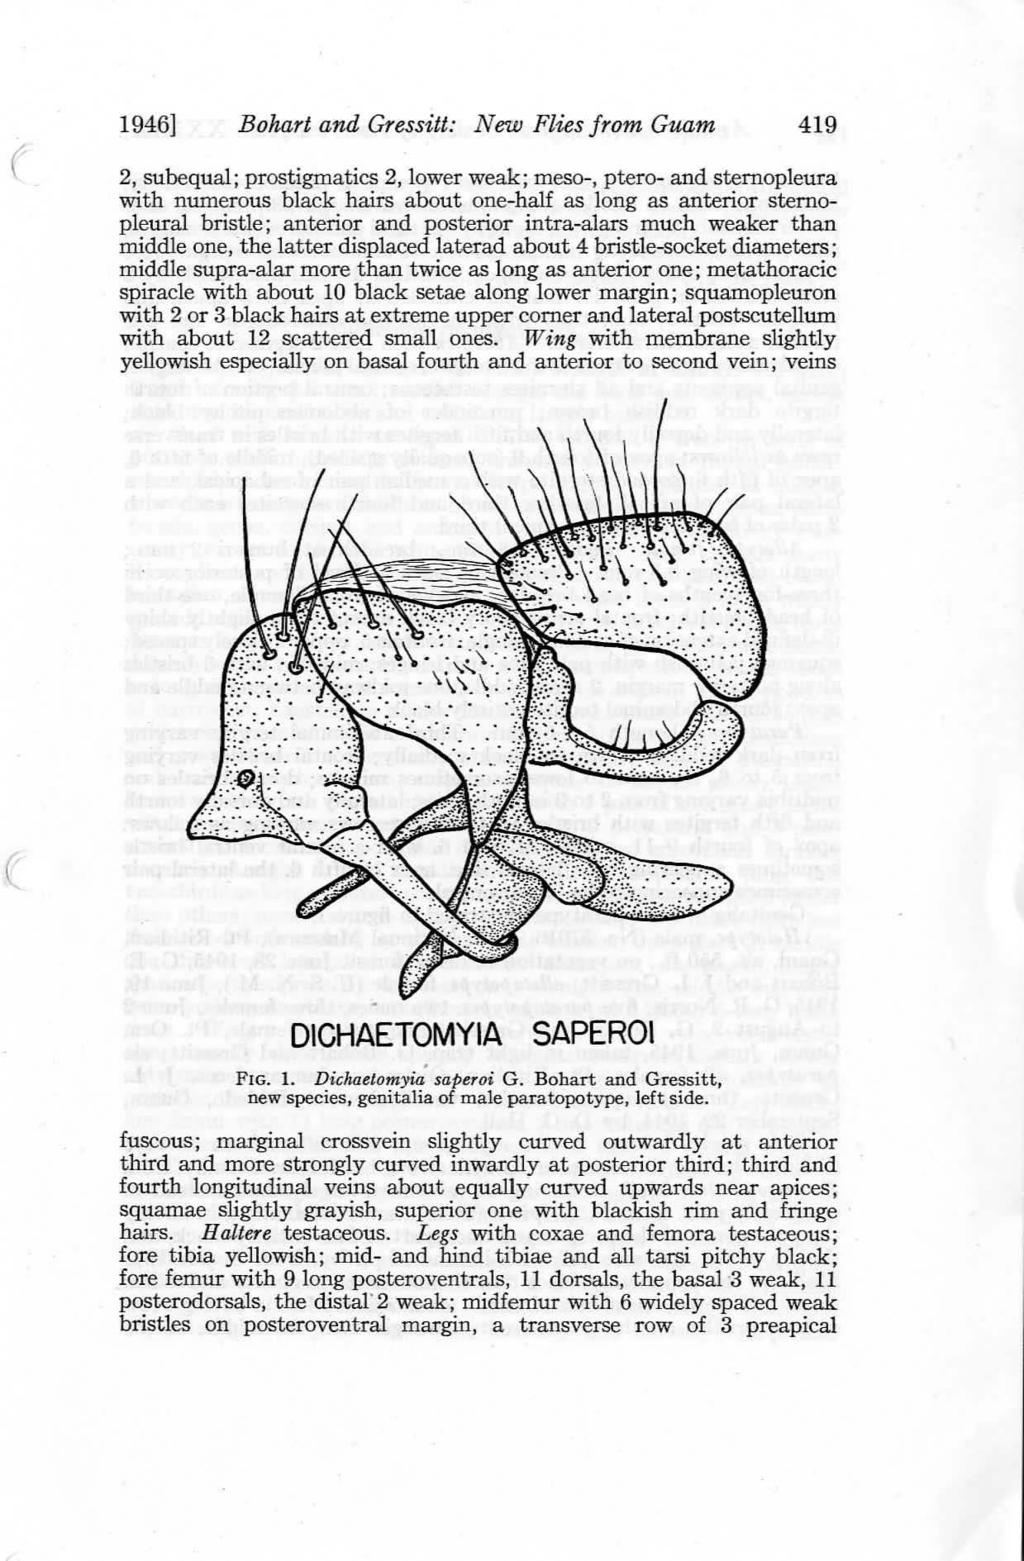 1946] Bohart and Gressitt: New Flies from Guam 419 2, subequal; prostigmatics 2, lower weak; meso-, ptero- and stemopleura with numerous black hairs about one-half as long as anterior sternopleural